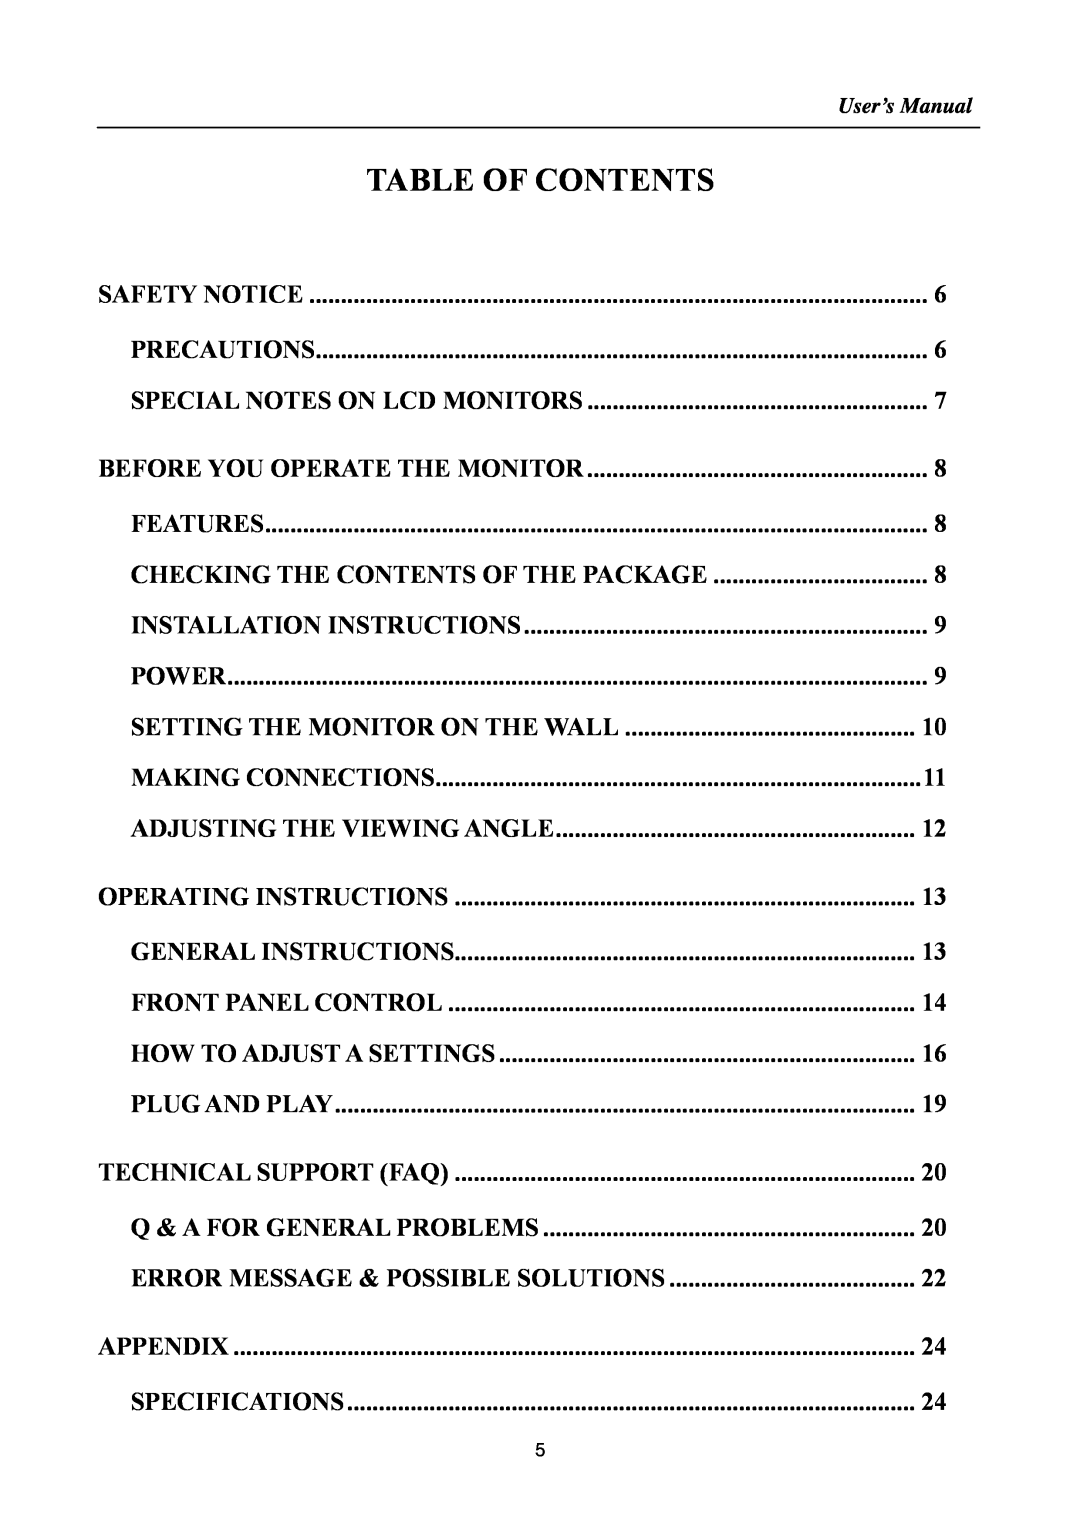 Hanns.G HA191 manual Table Of Contents, Error Message & Possible Solutions 